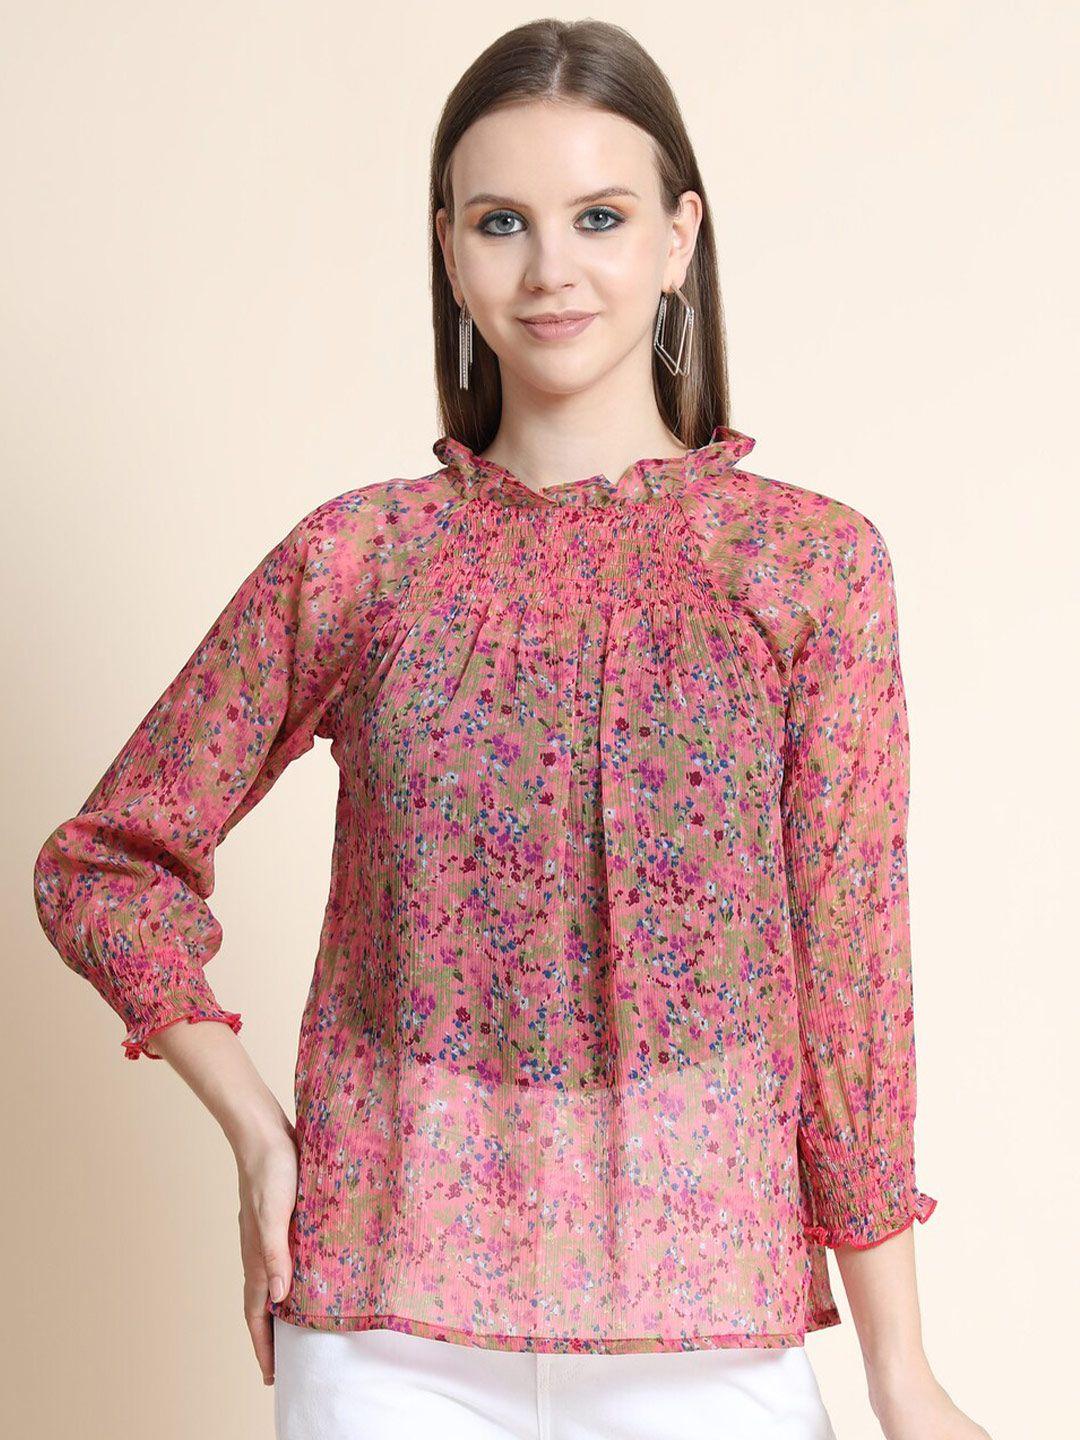 rediscover fashion pink floral print top